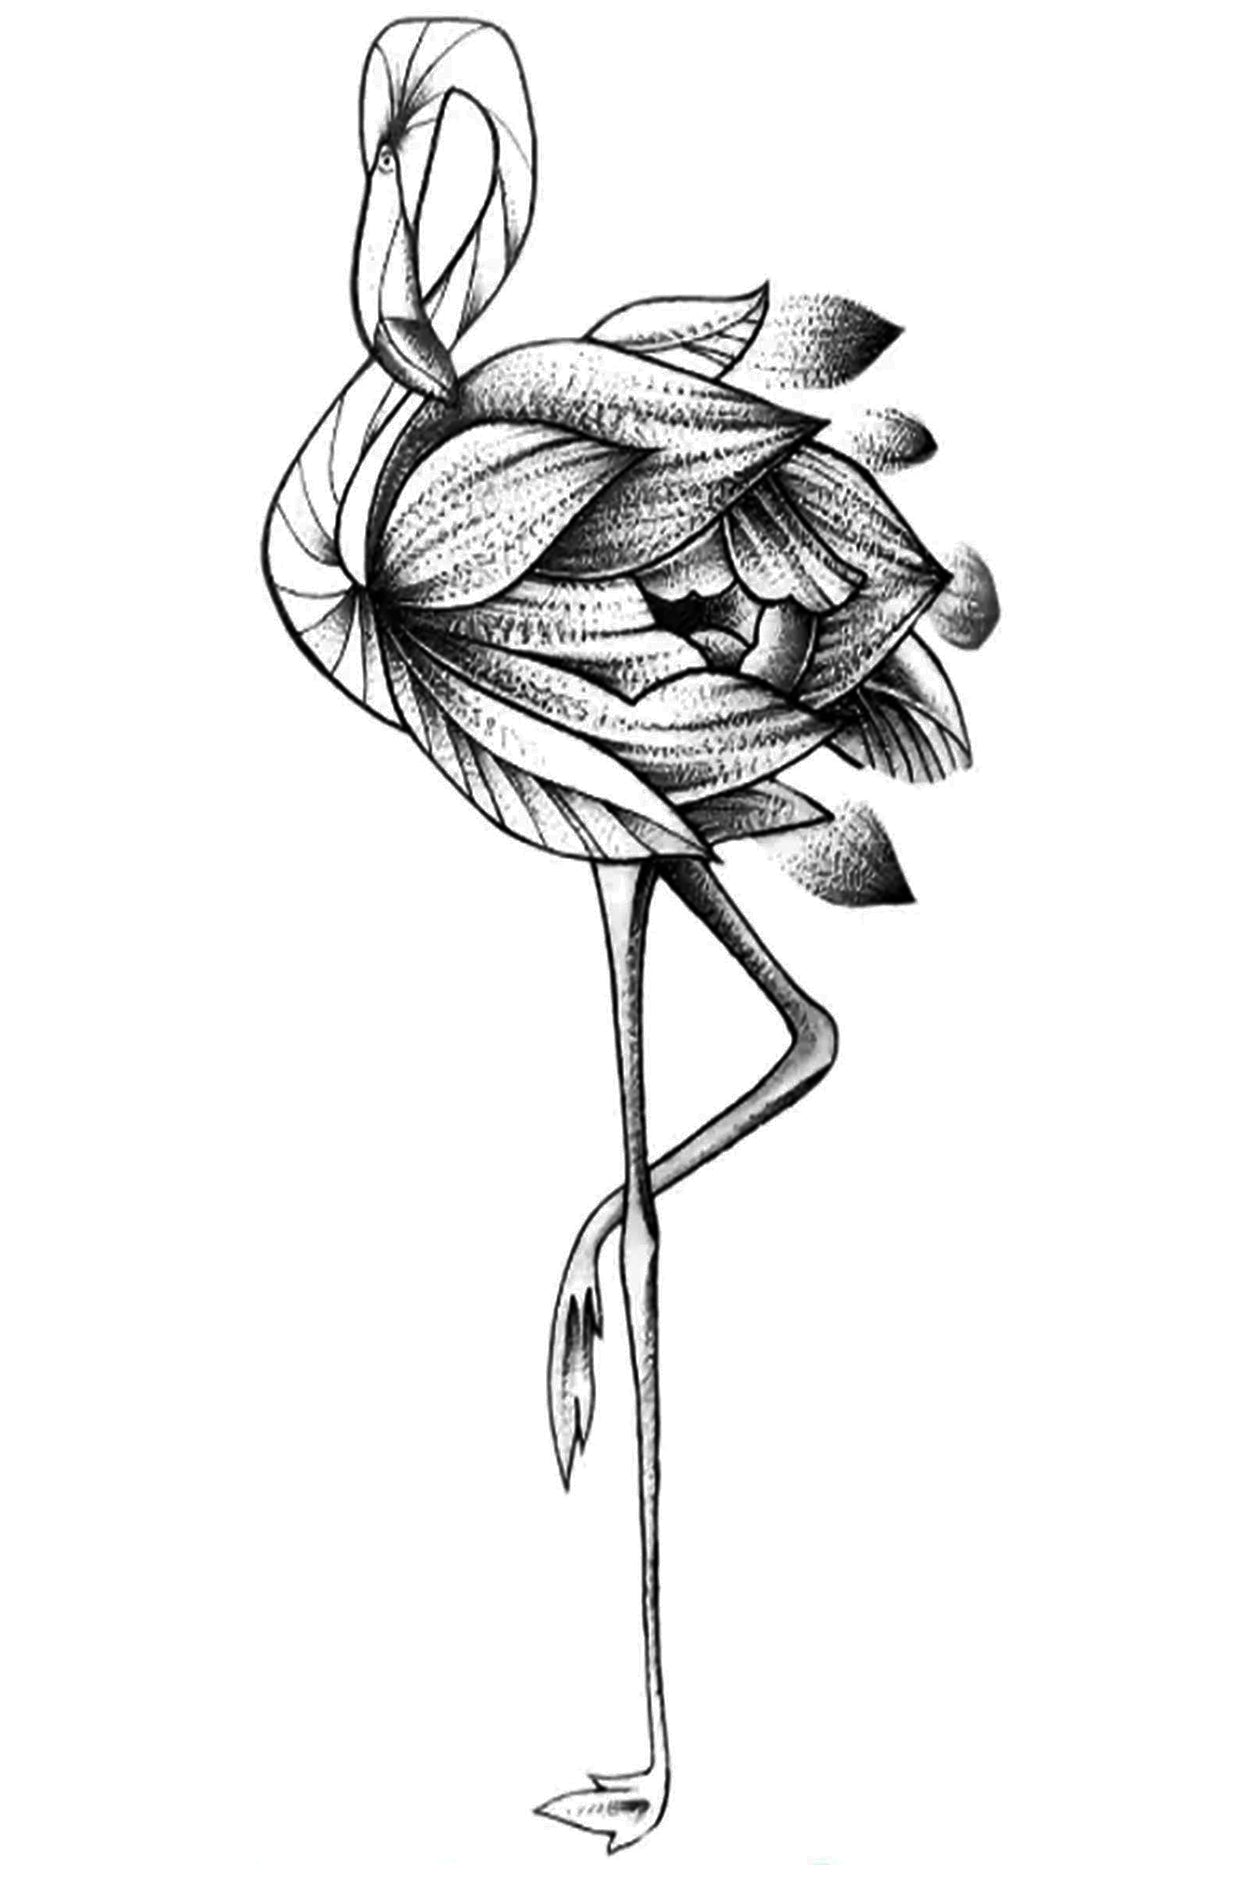 An artistic version of a flamingo, feathers are leaves and petals. This tag is shadowed for texture and bounce. A very realistic traditional inked look.